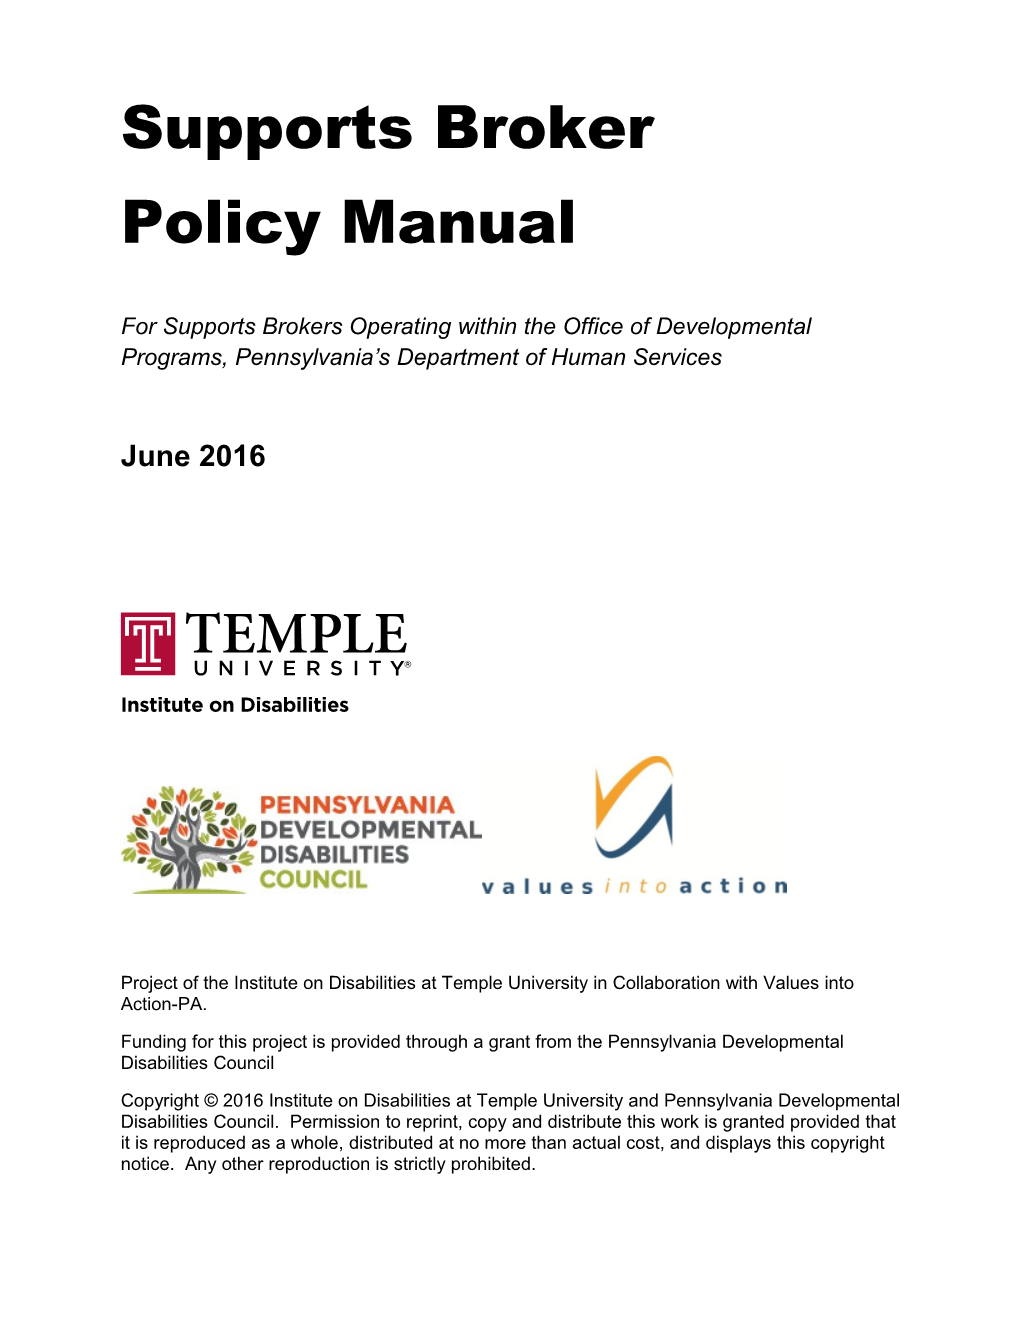 Supports Broker Policy Manual